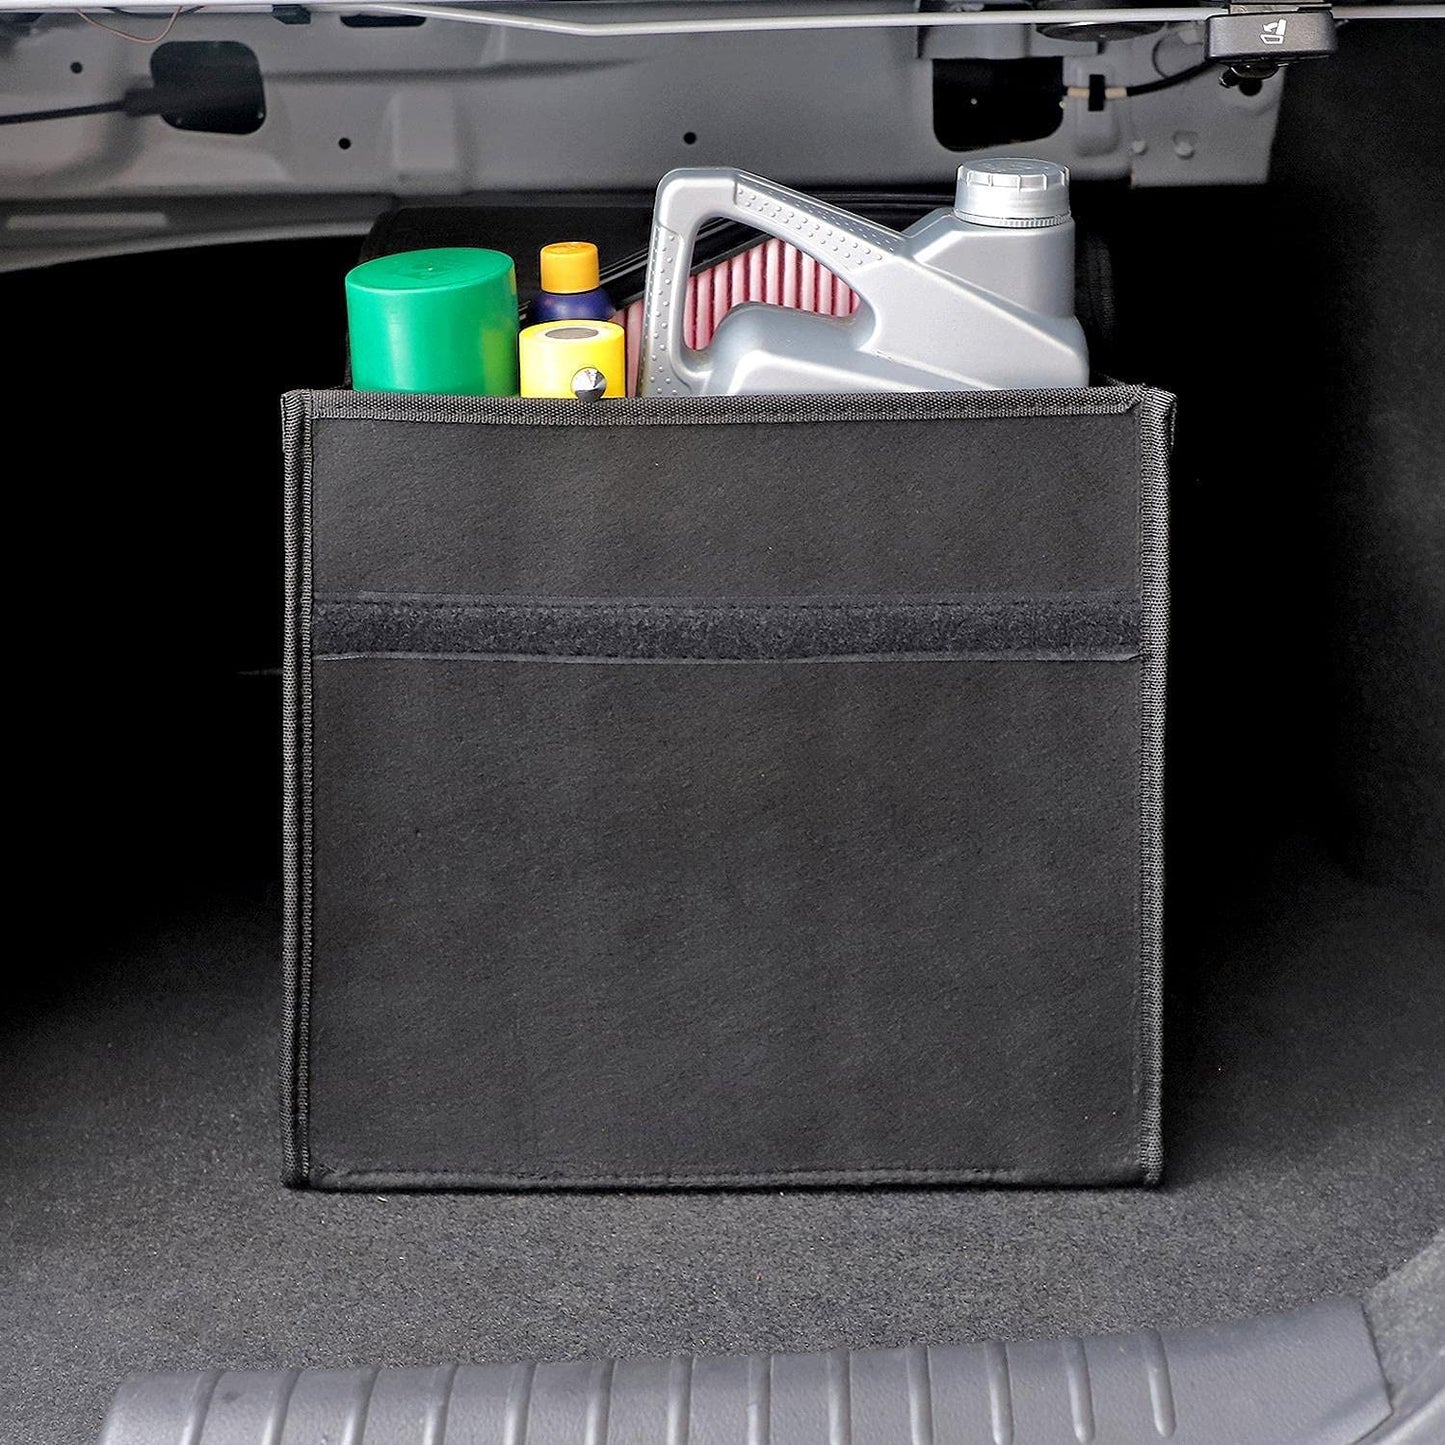 Small Portable Foldable Car Trunk Organizer Felt Cloth Storage Box Case Auto Interior Stowing Tidying Container Bags - Black